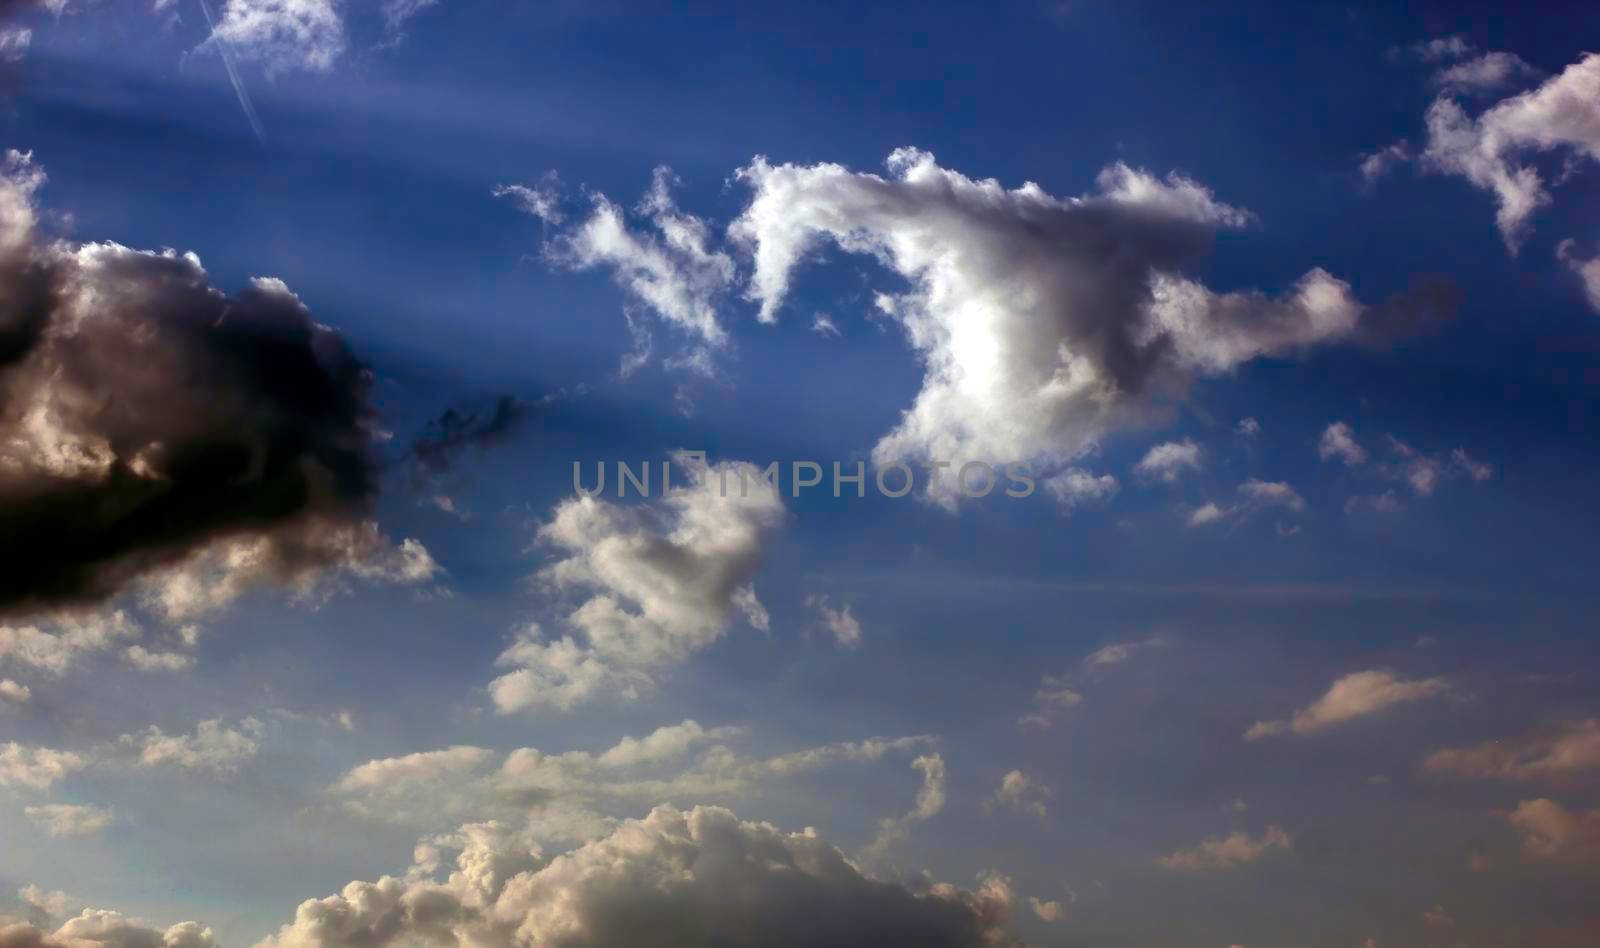 Romantic clouds background by Lirch